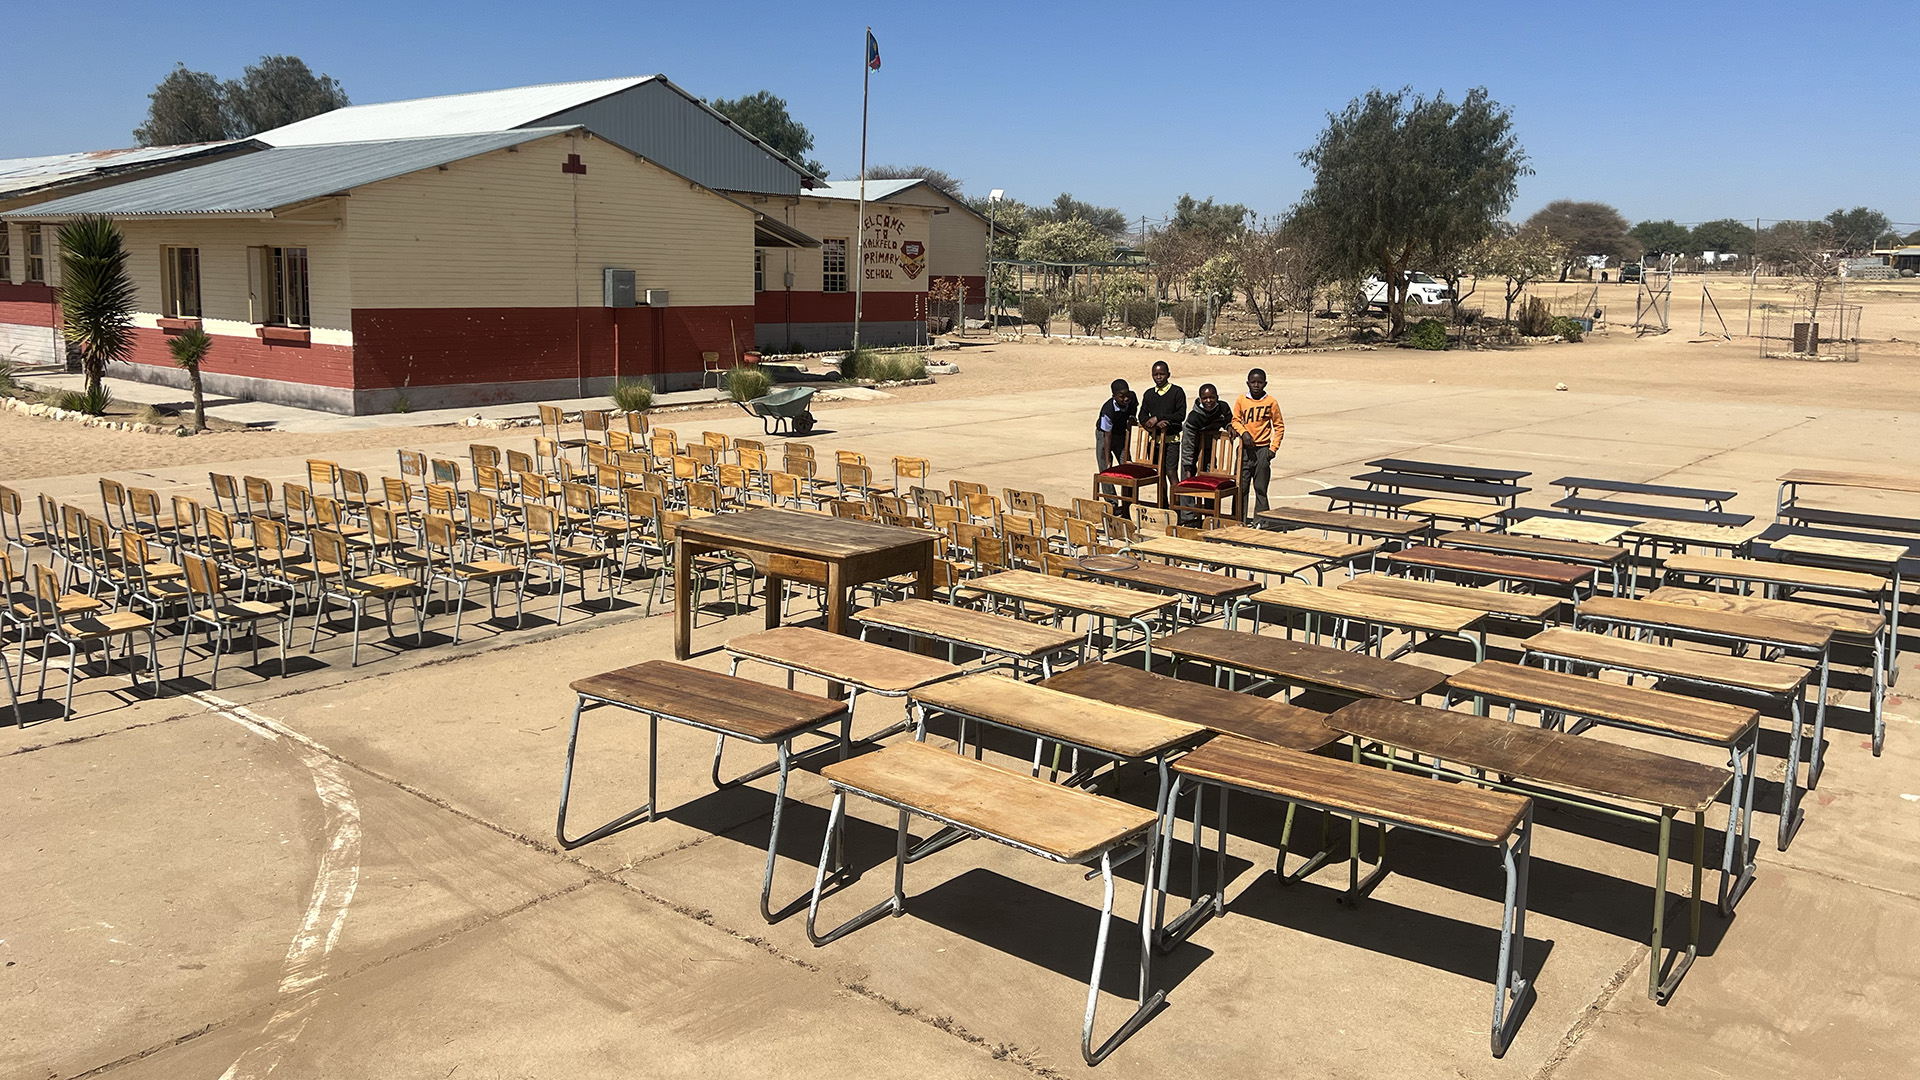 ... again a total of 91 functional chairs and 37 usable tables